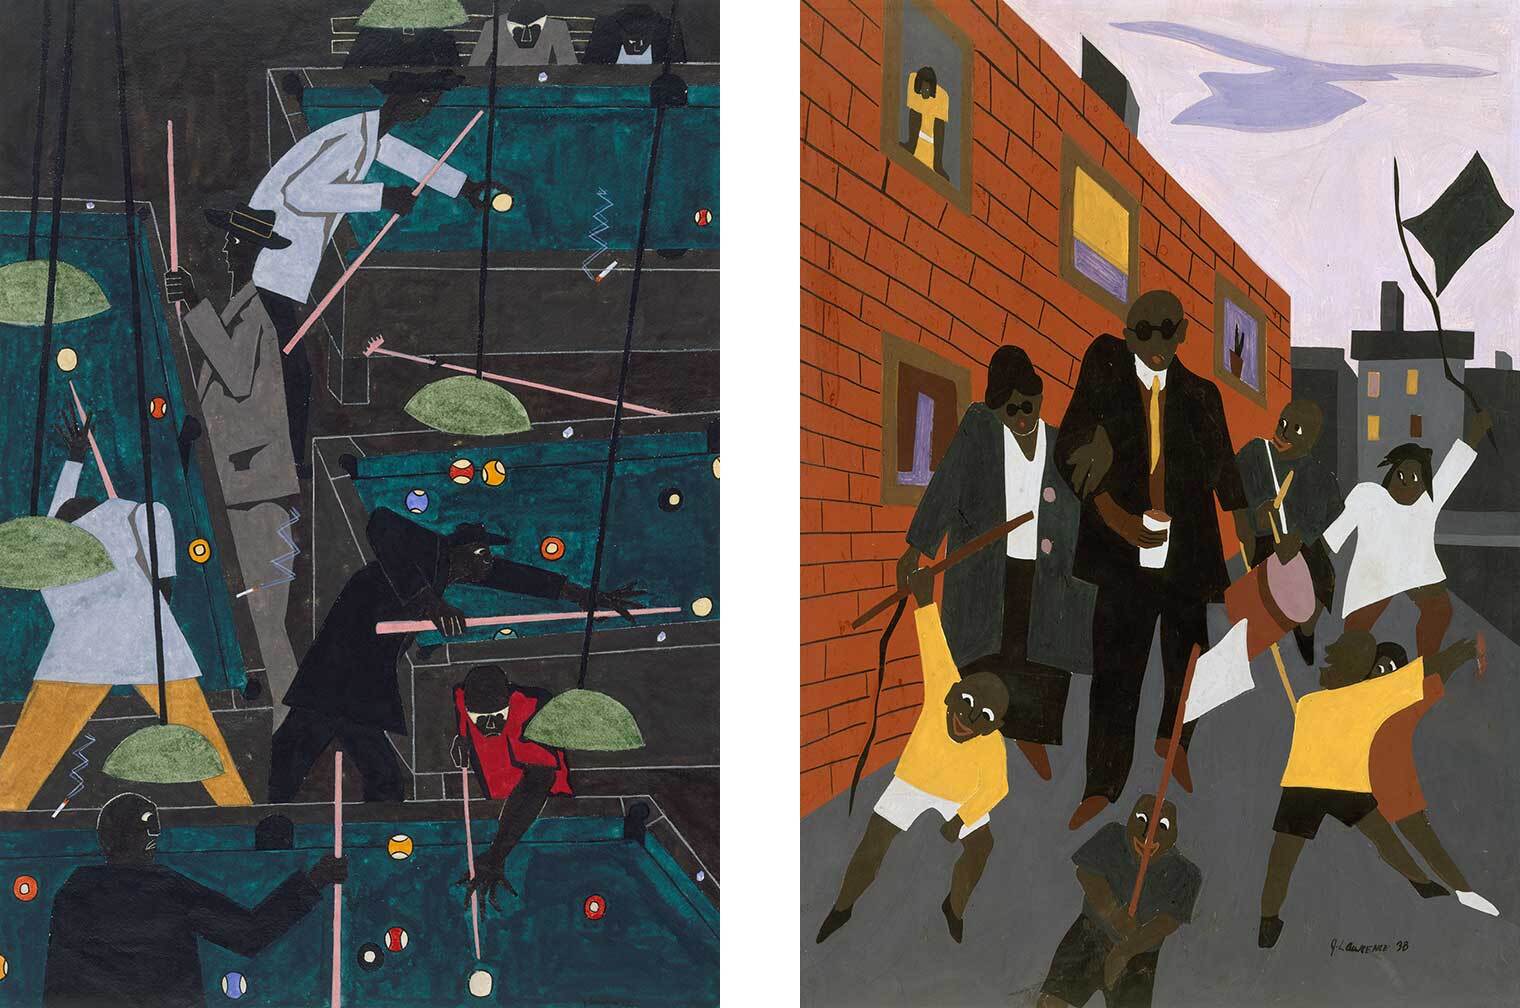 Left: A painting of an overhead view of a crowded pool hall. Right: A painting of several Black figures walking down a street holding canes